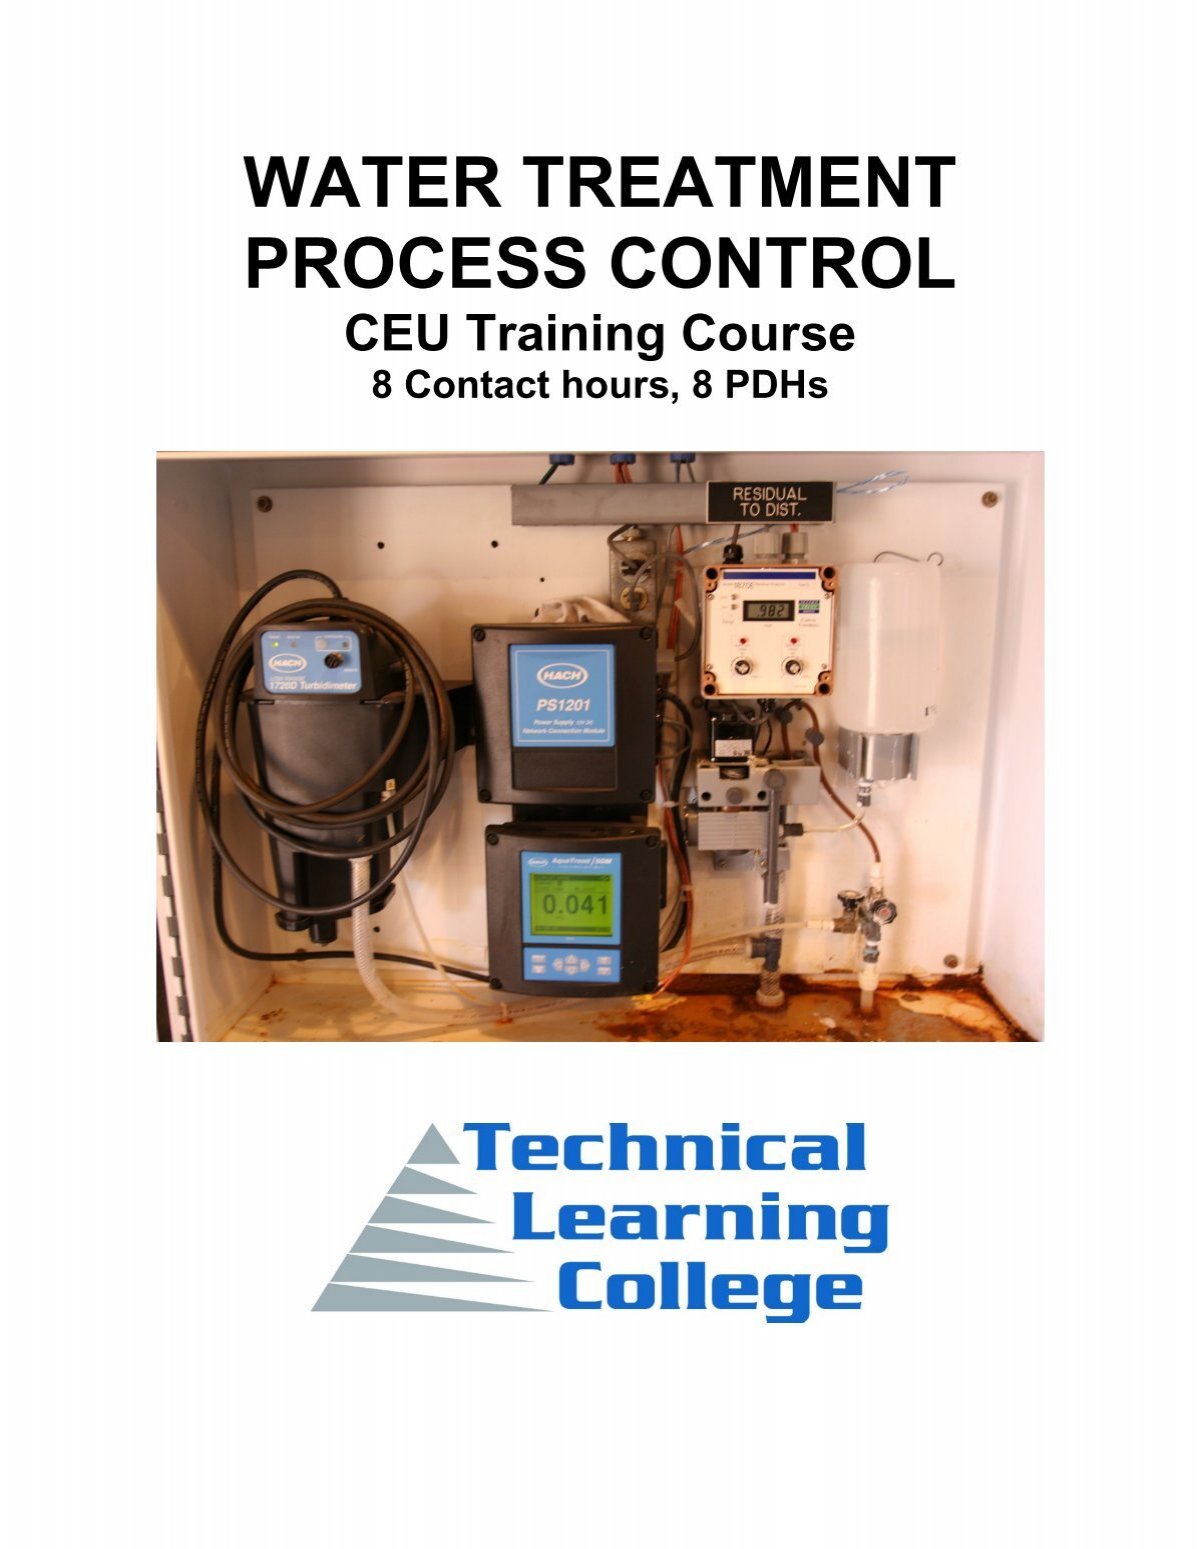 water treatment process control - Technical Learning College